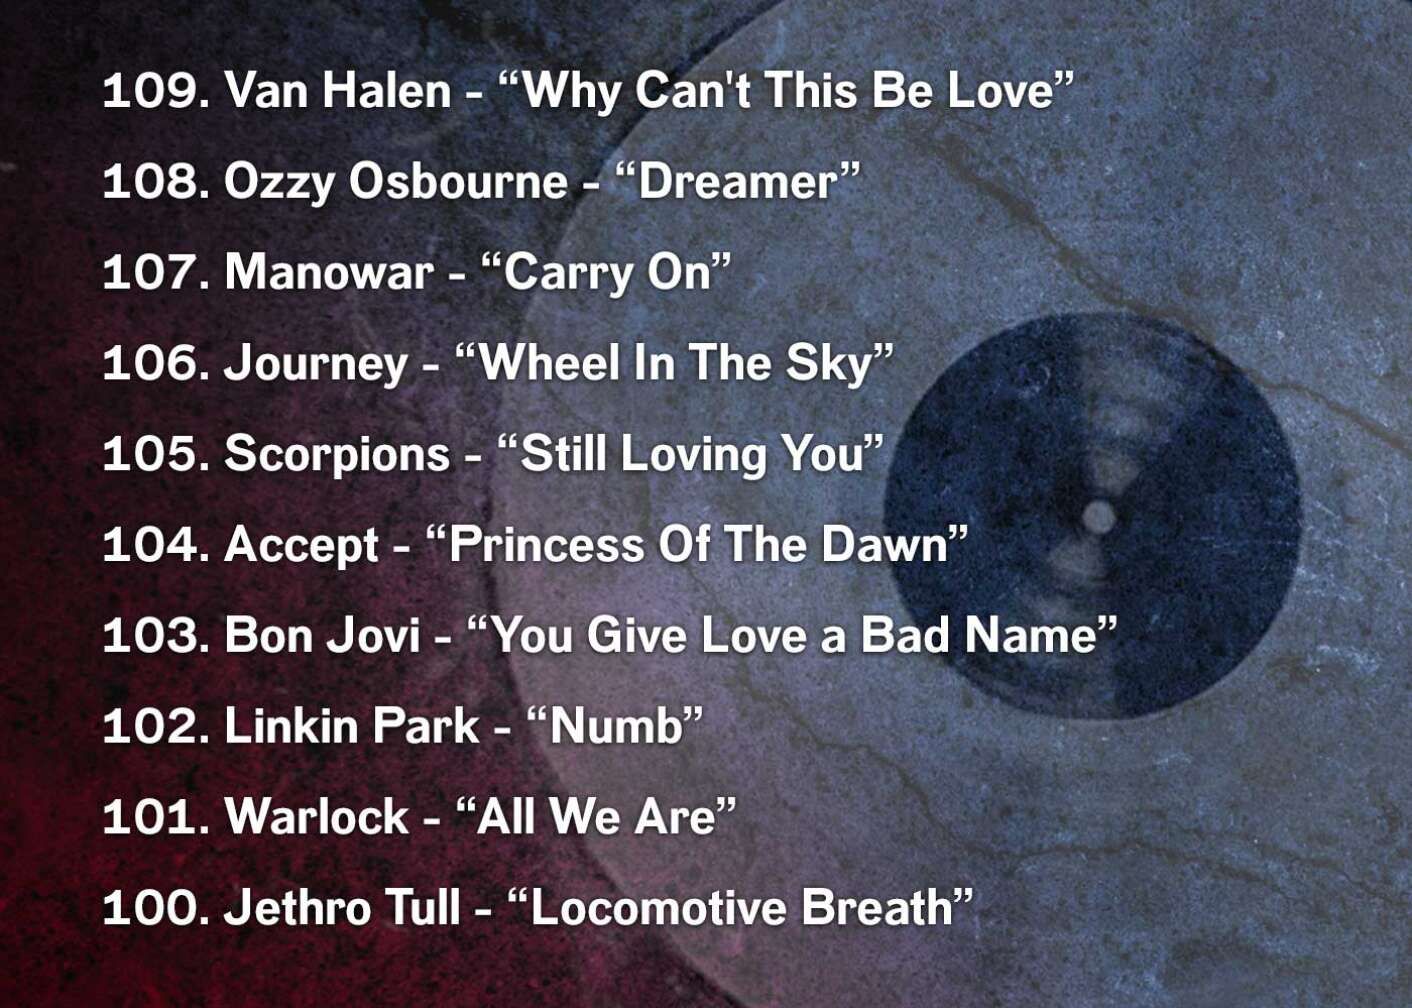 109. Van Halen - “Why Can't This Be Love” 108. Ozzy Osbourne - “Dreamer” 107. Manowar - “Carry On” 106. Journey - “Wheel In The Sky” 105. Scorpions - “Still Loving You” 104. Accept - “Princess Of The Dawn” 103. Bon Jovi - “You Give Love a Bad Name” 102. Linkin Park - “Numb” 101. Warlock - “All We Are” 100. Jethro Tull - “Locomotive Breath”